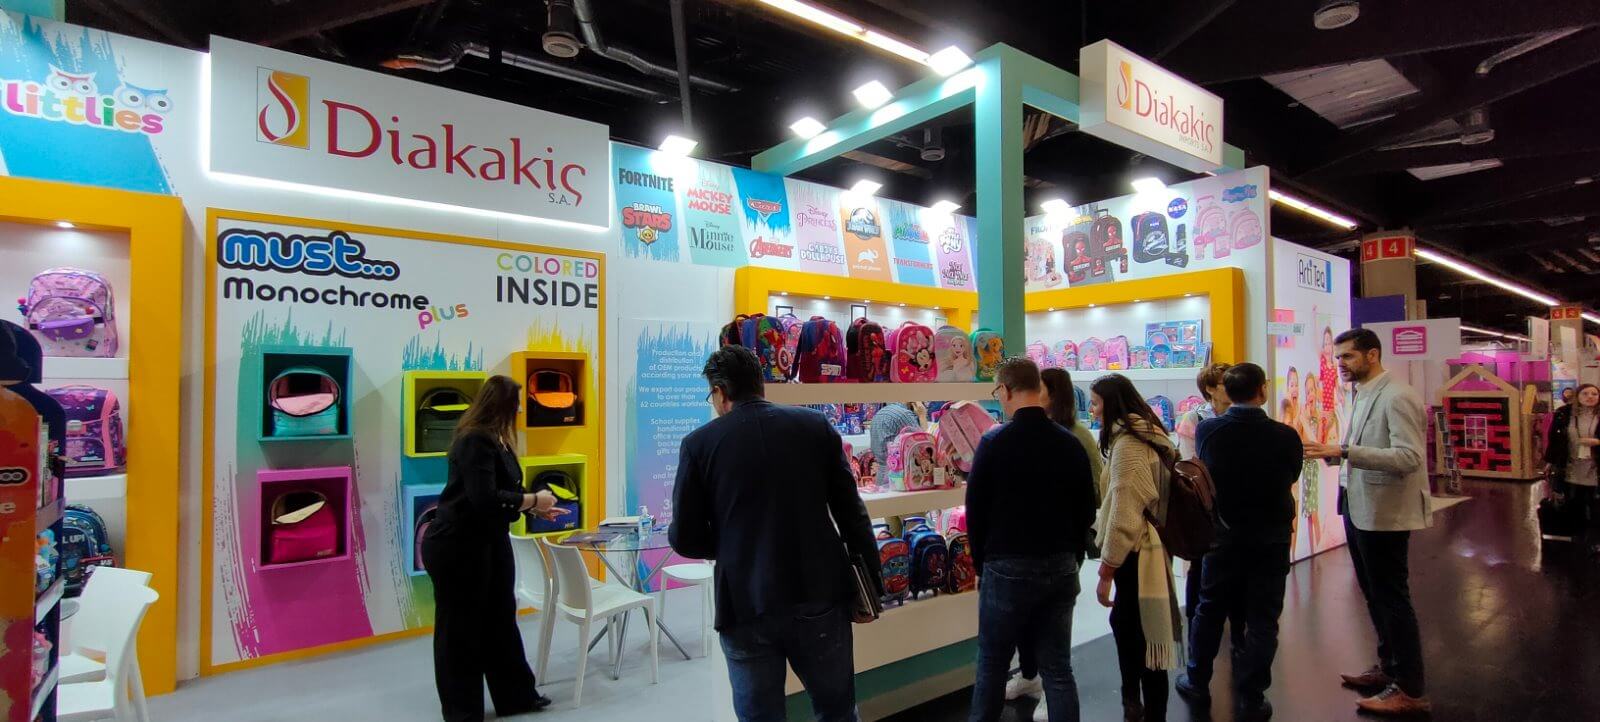 The booth of Diakaki Imports S.A. is at the center of attraction at Spielwarenmesse